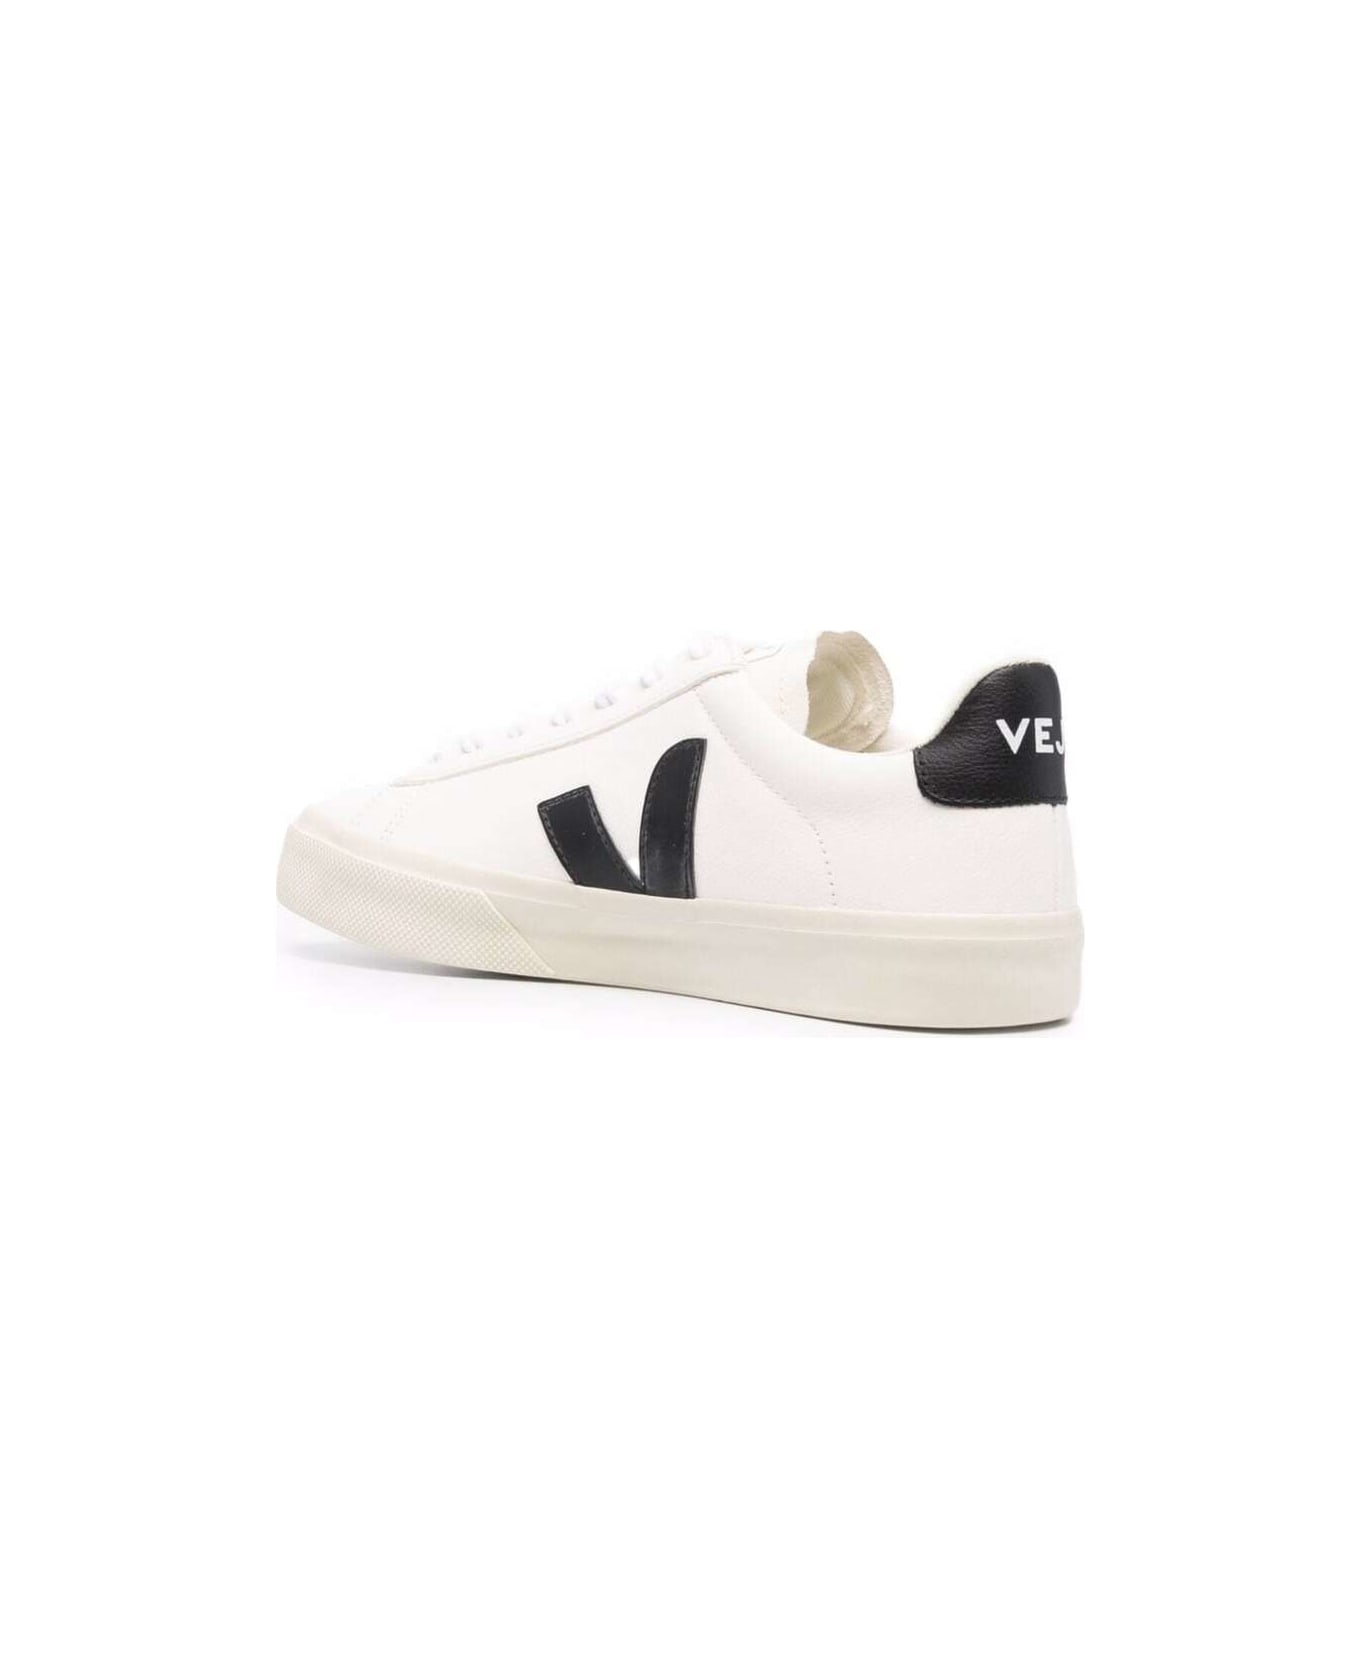 Veja Woman's Campo White And Black Vegan Leather Sneakers - Extra White/ Black